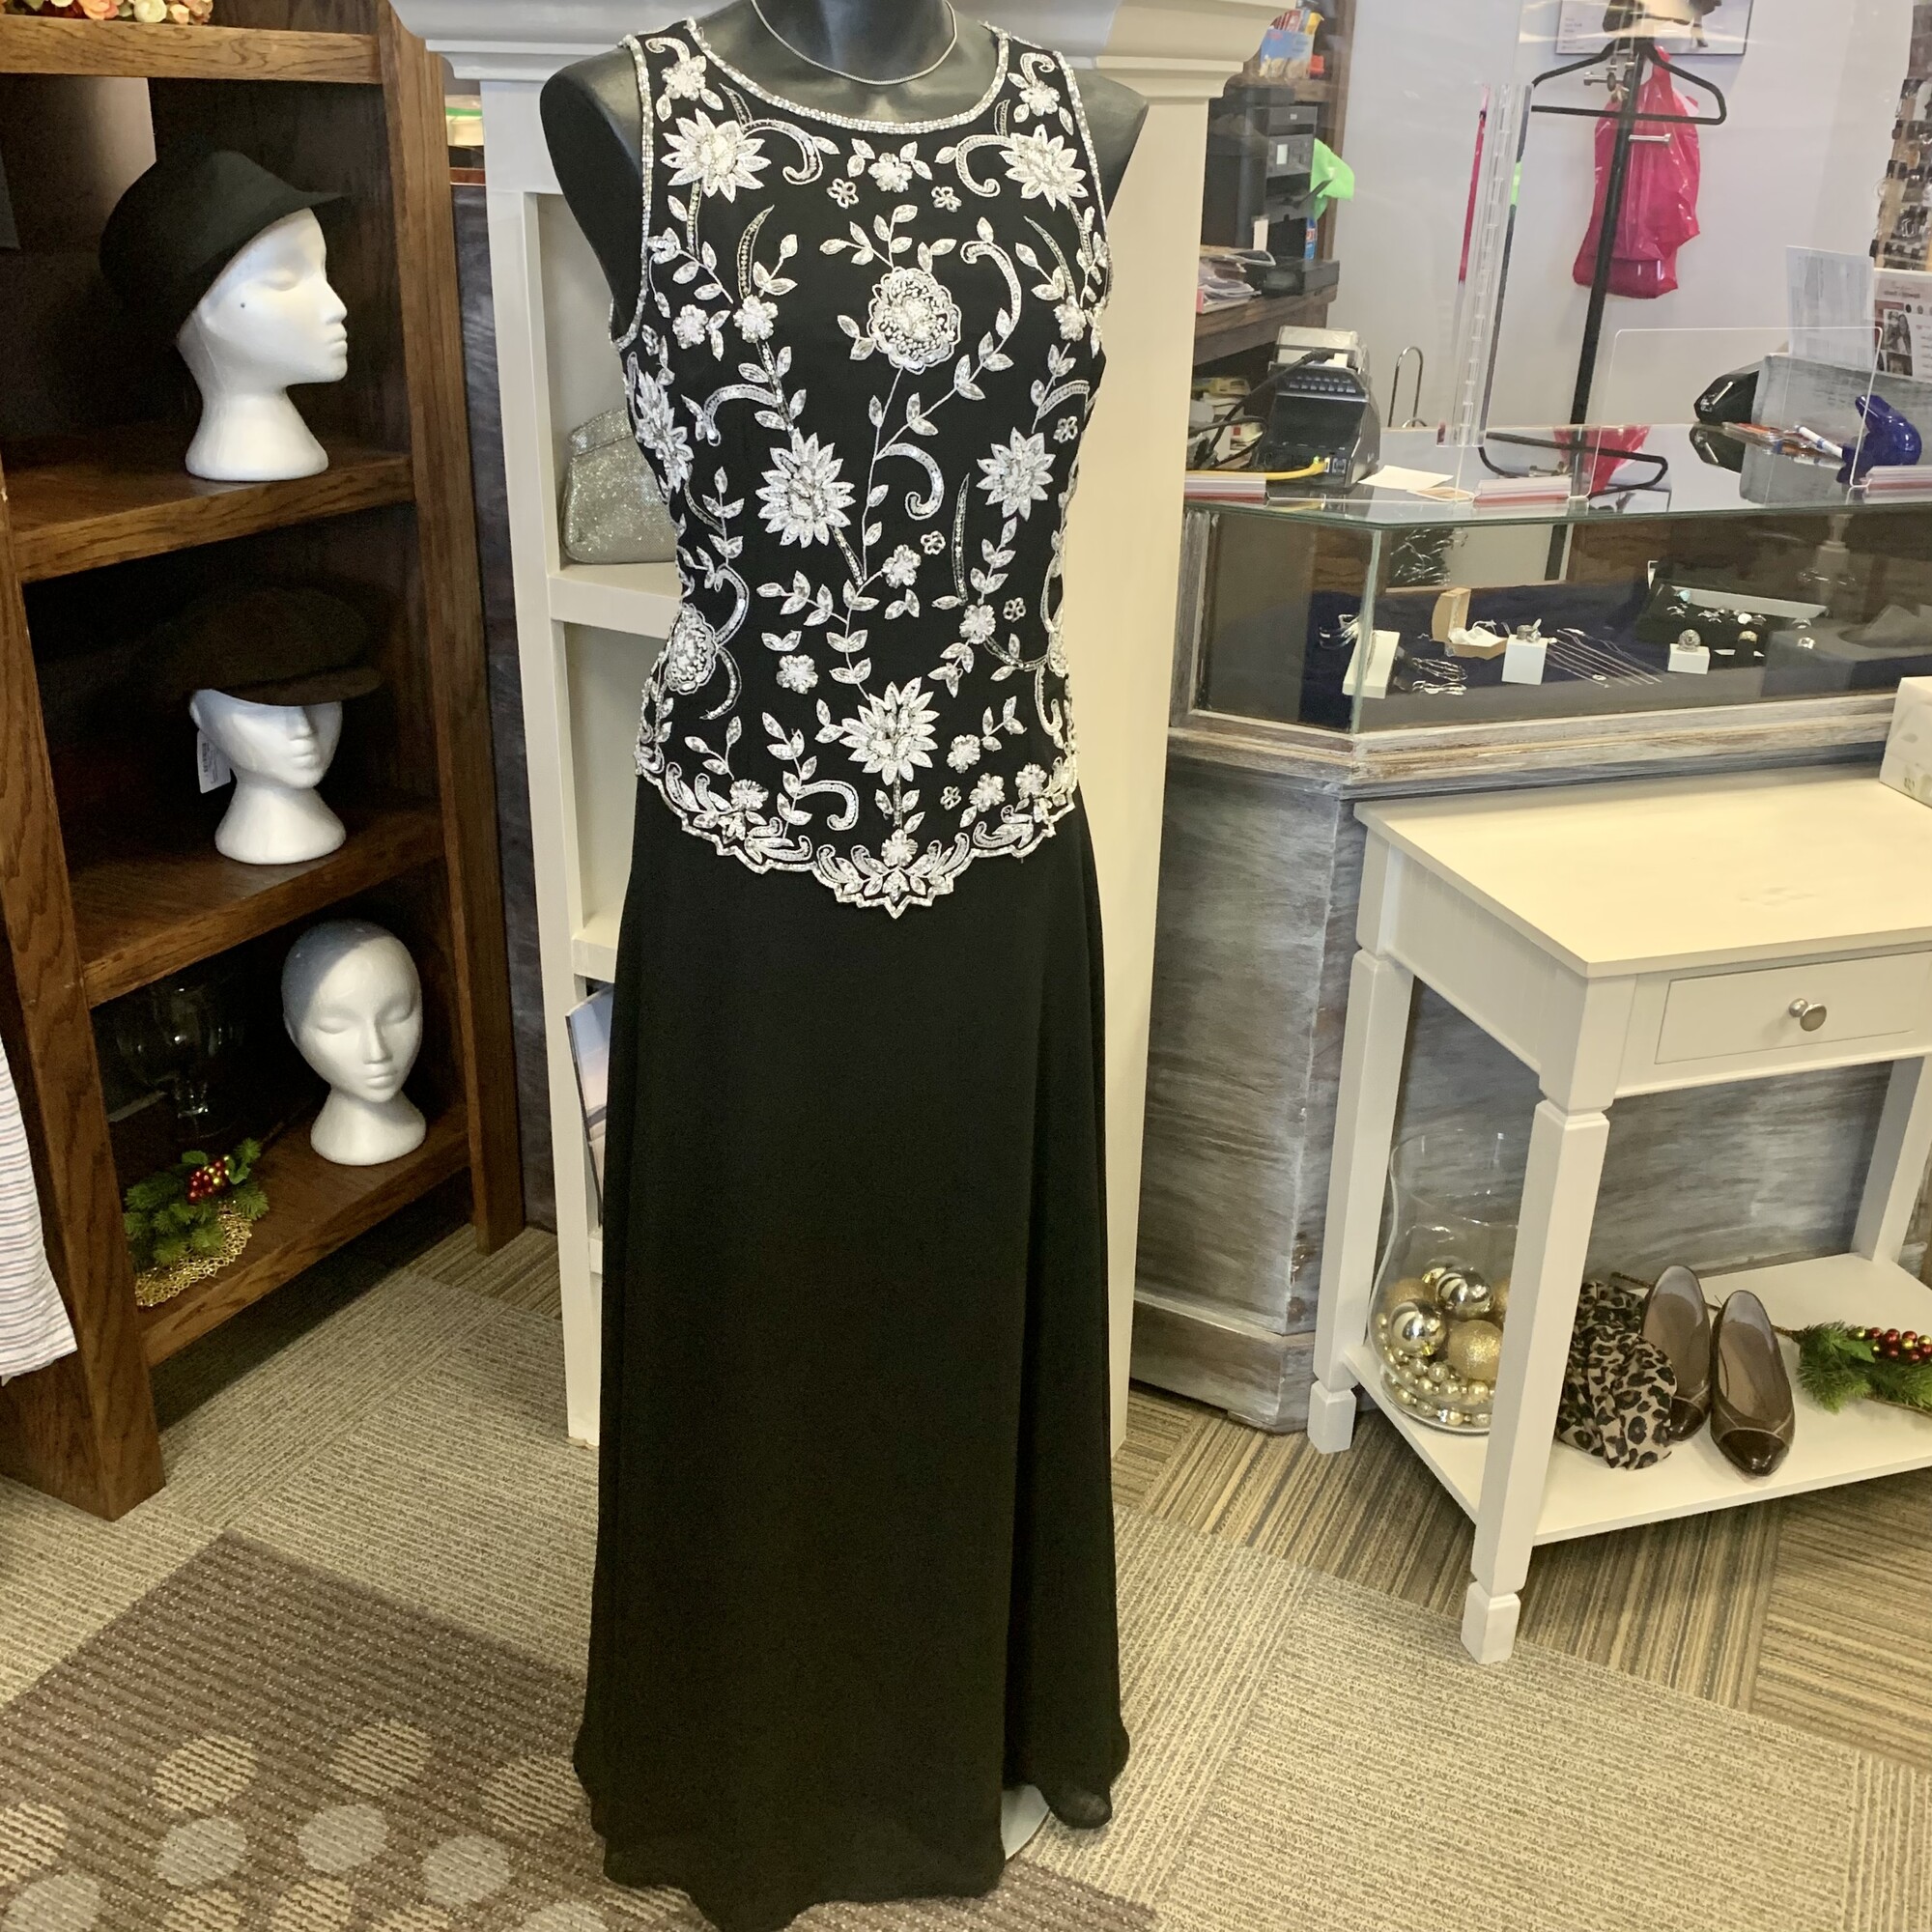 Dkara New York Gown,
Colour: Black with silver and white beading,
Size: 10; armpit to armpit: 19inch
Beautiful dress with semi detached top ensuring an elegant waistline.